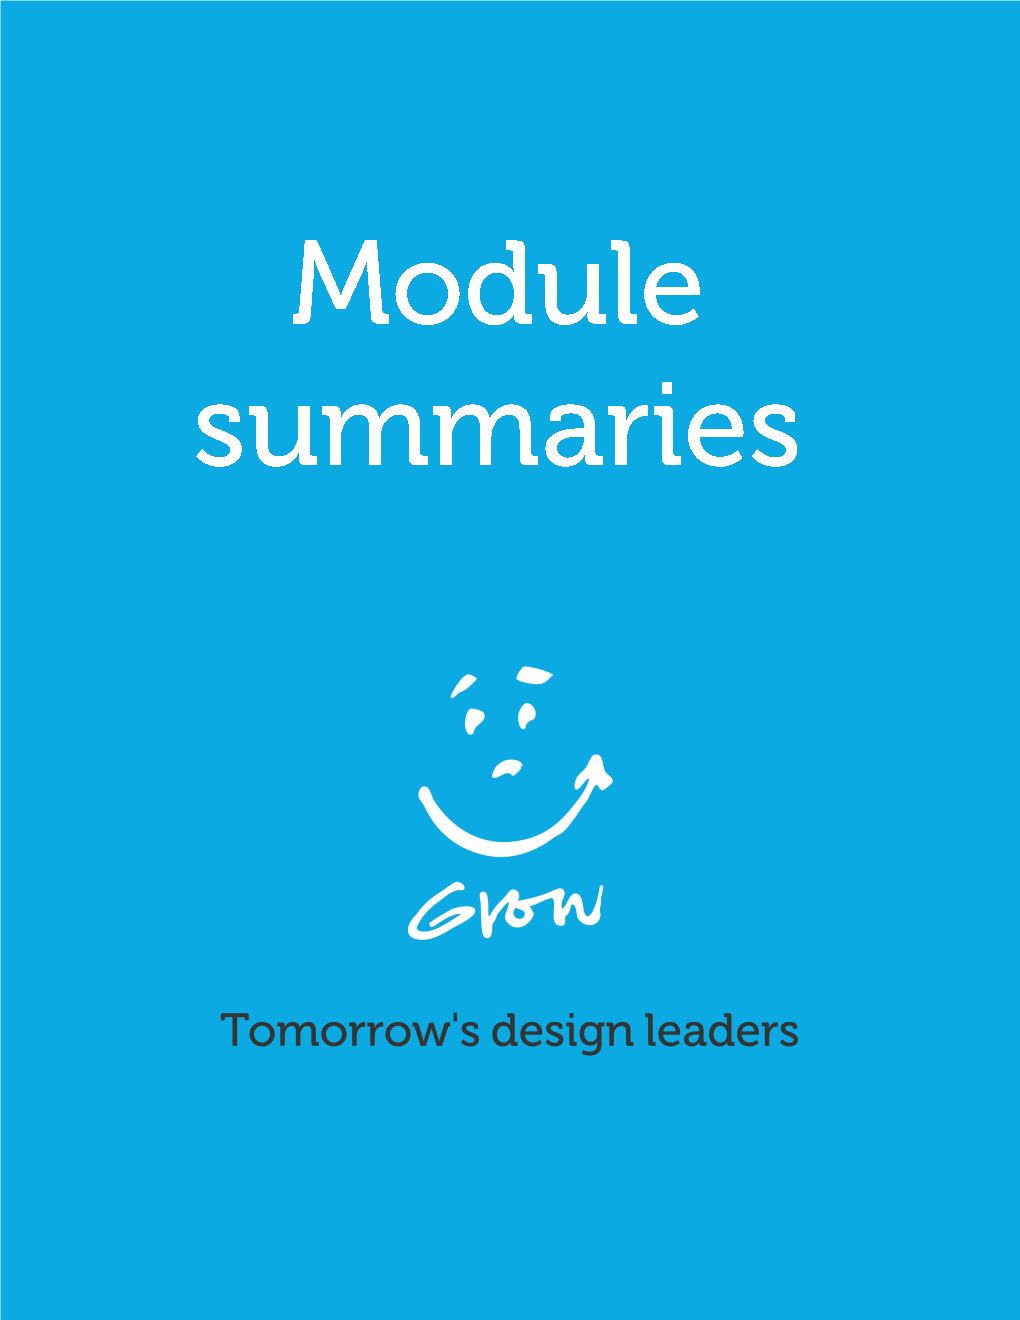 Read More About GROW Design Leadership